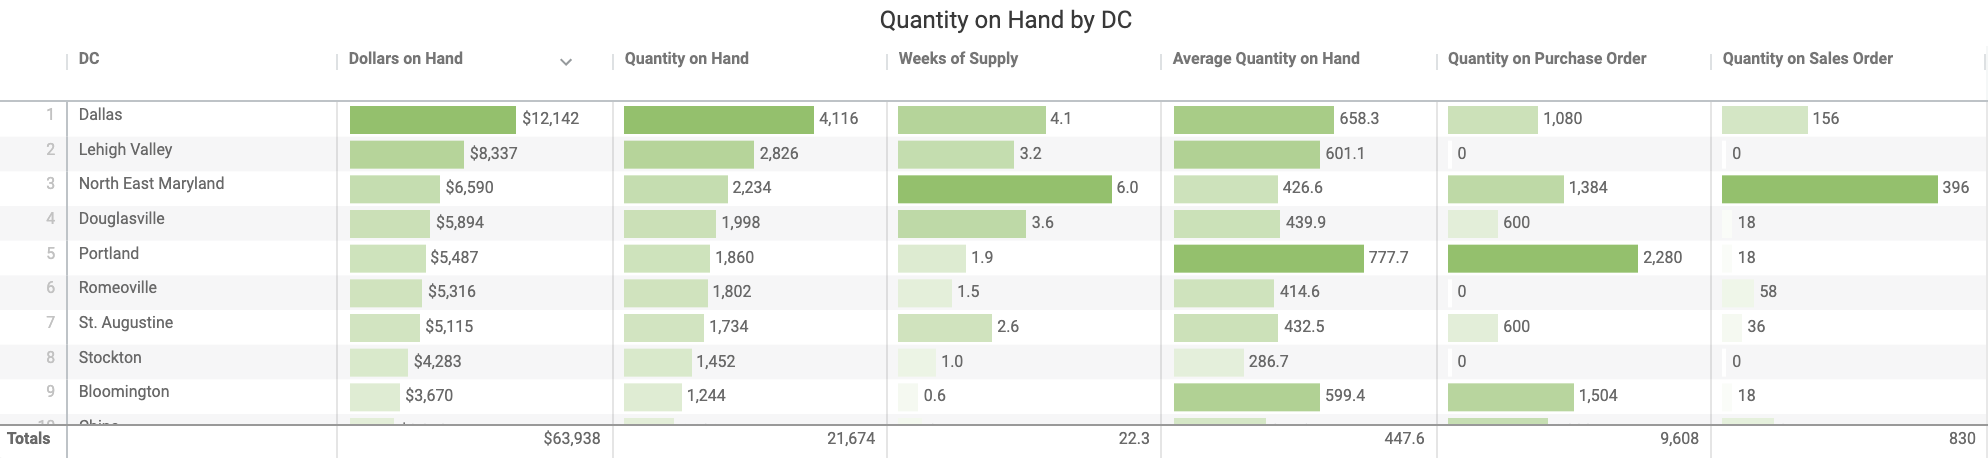 Quantity_on_Hand_by_DC__Table_.png